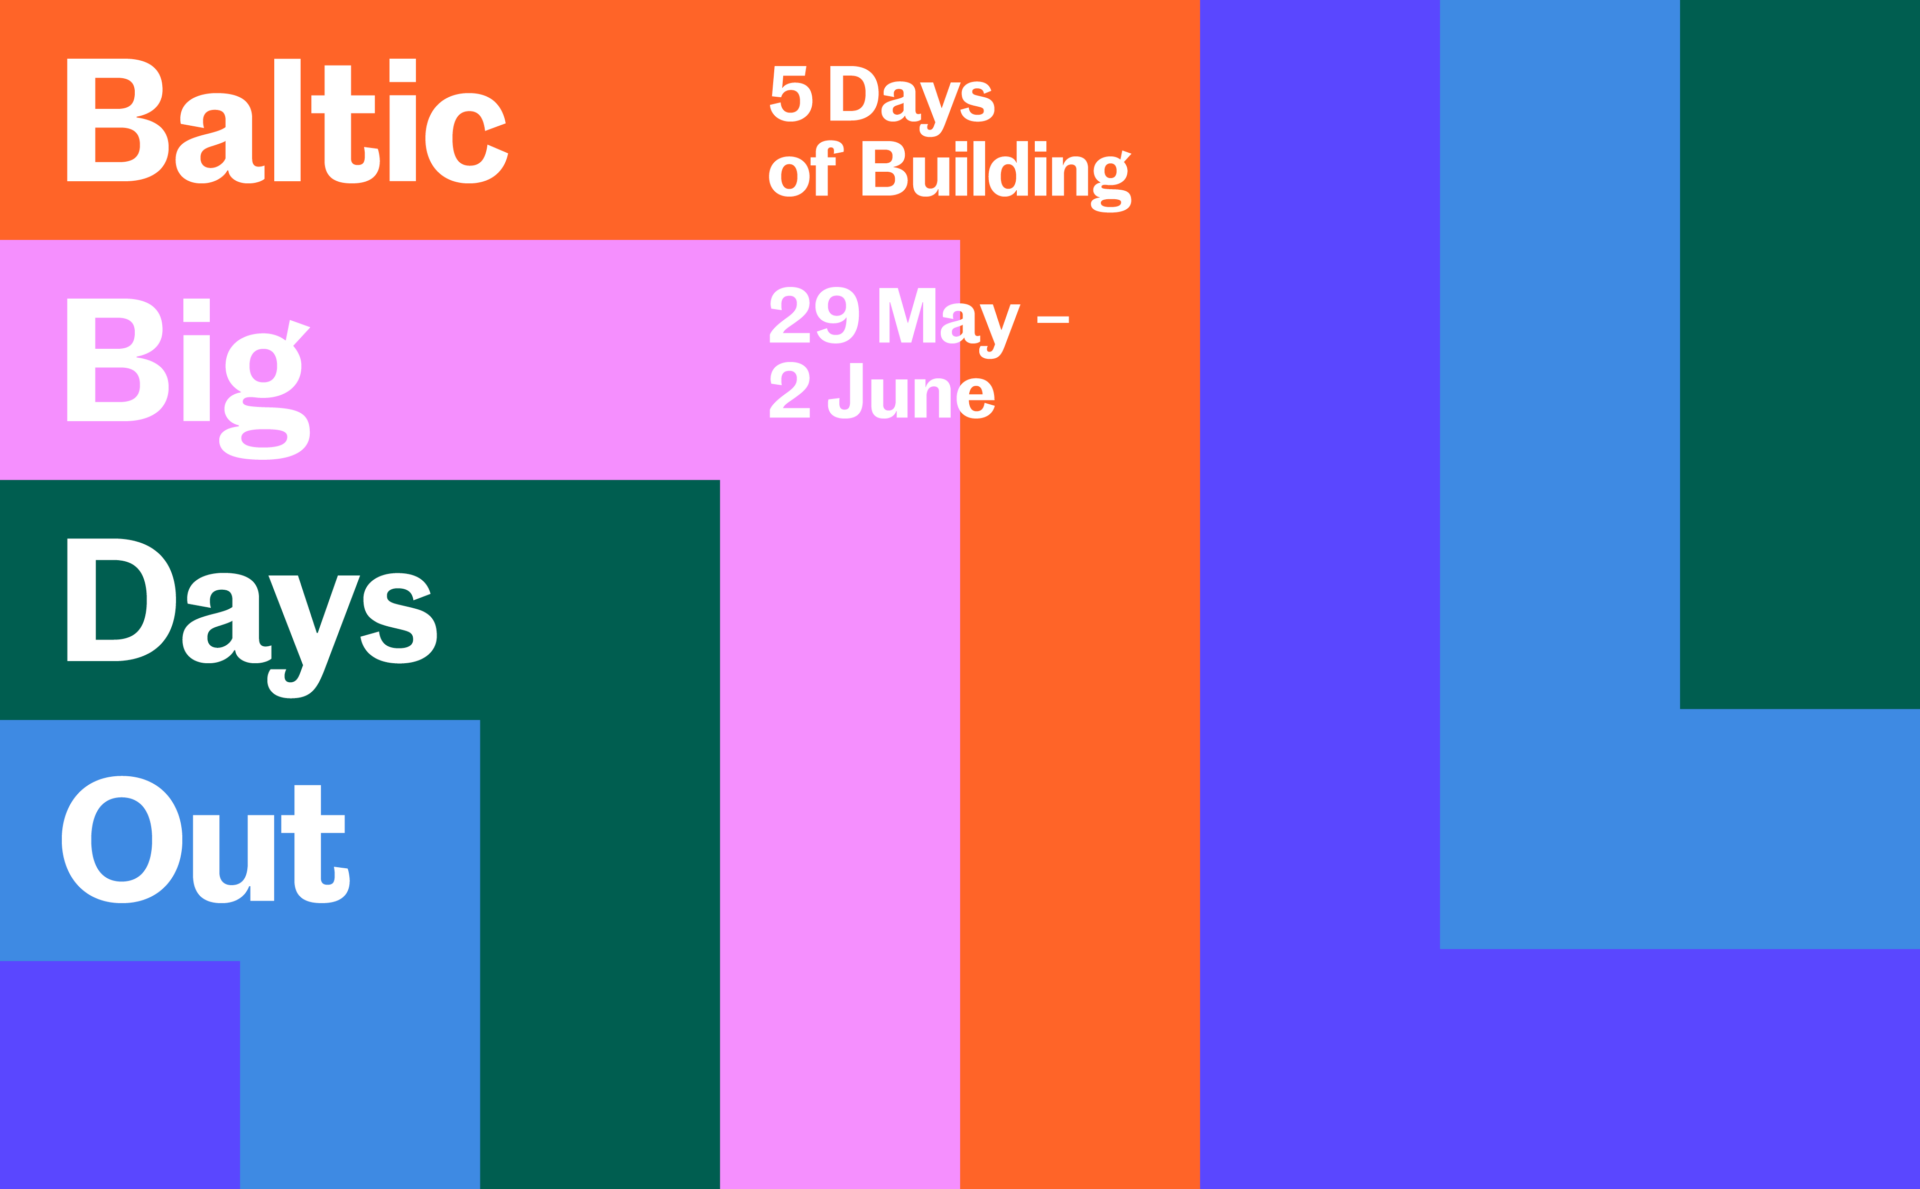 Baltic Big Days Out: 5 Days of Building